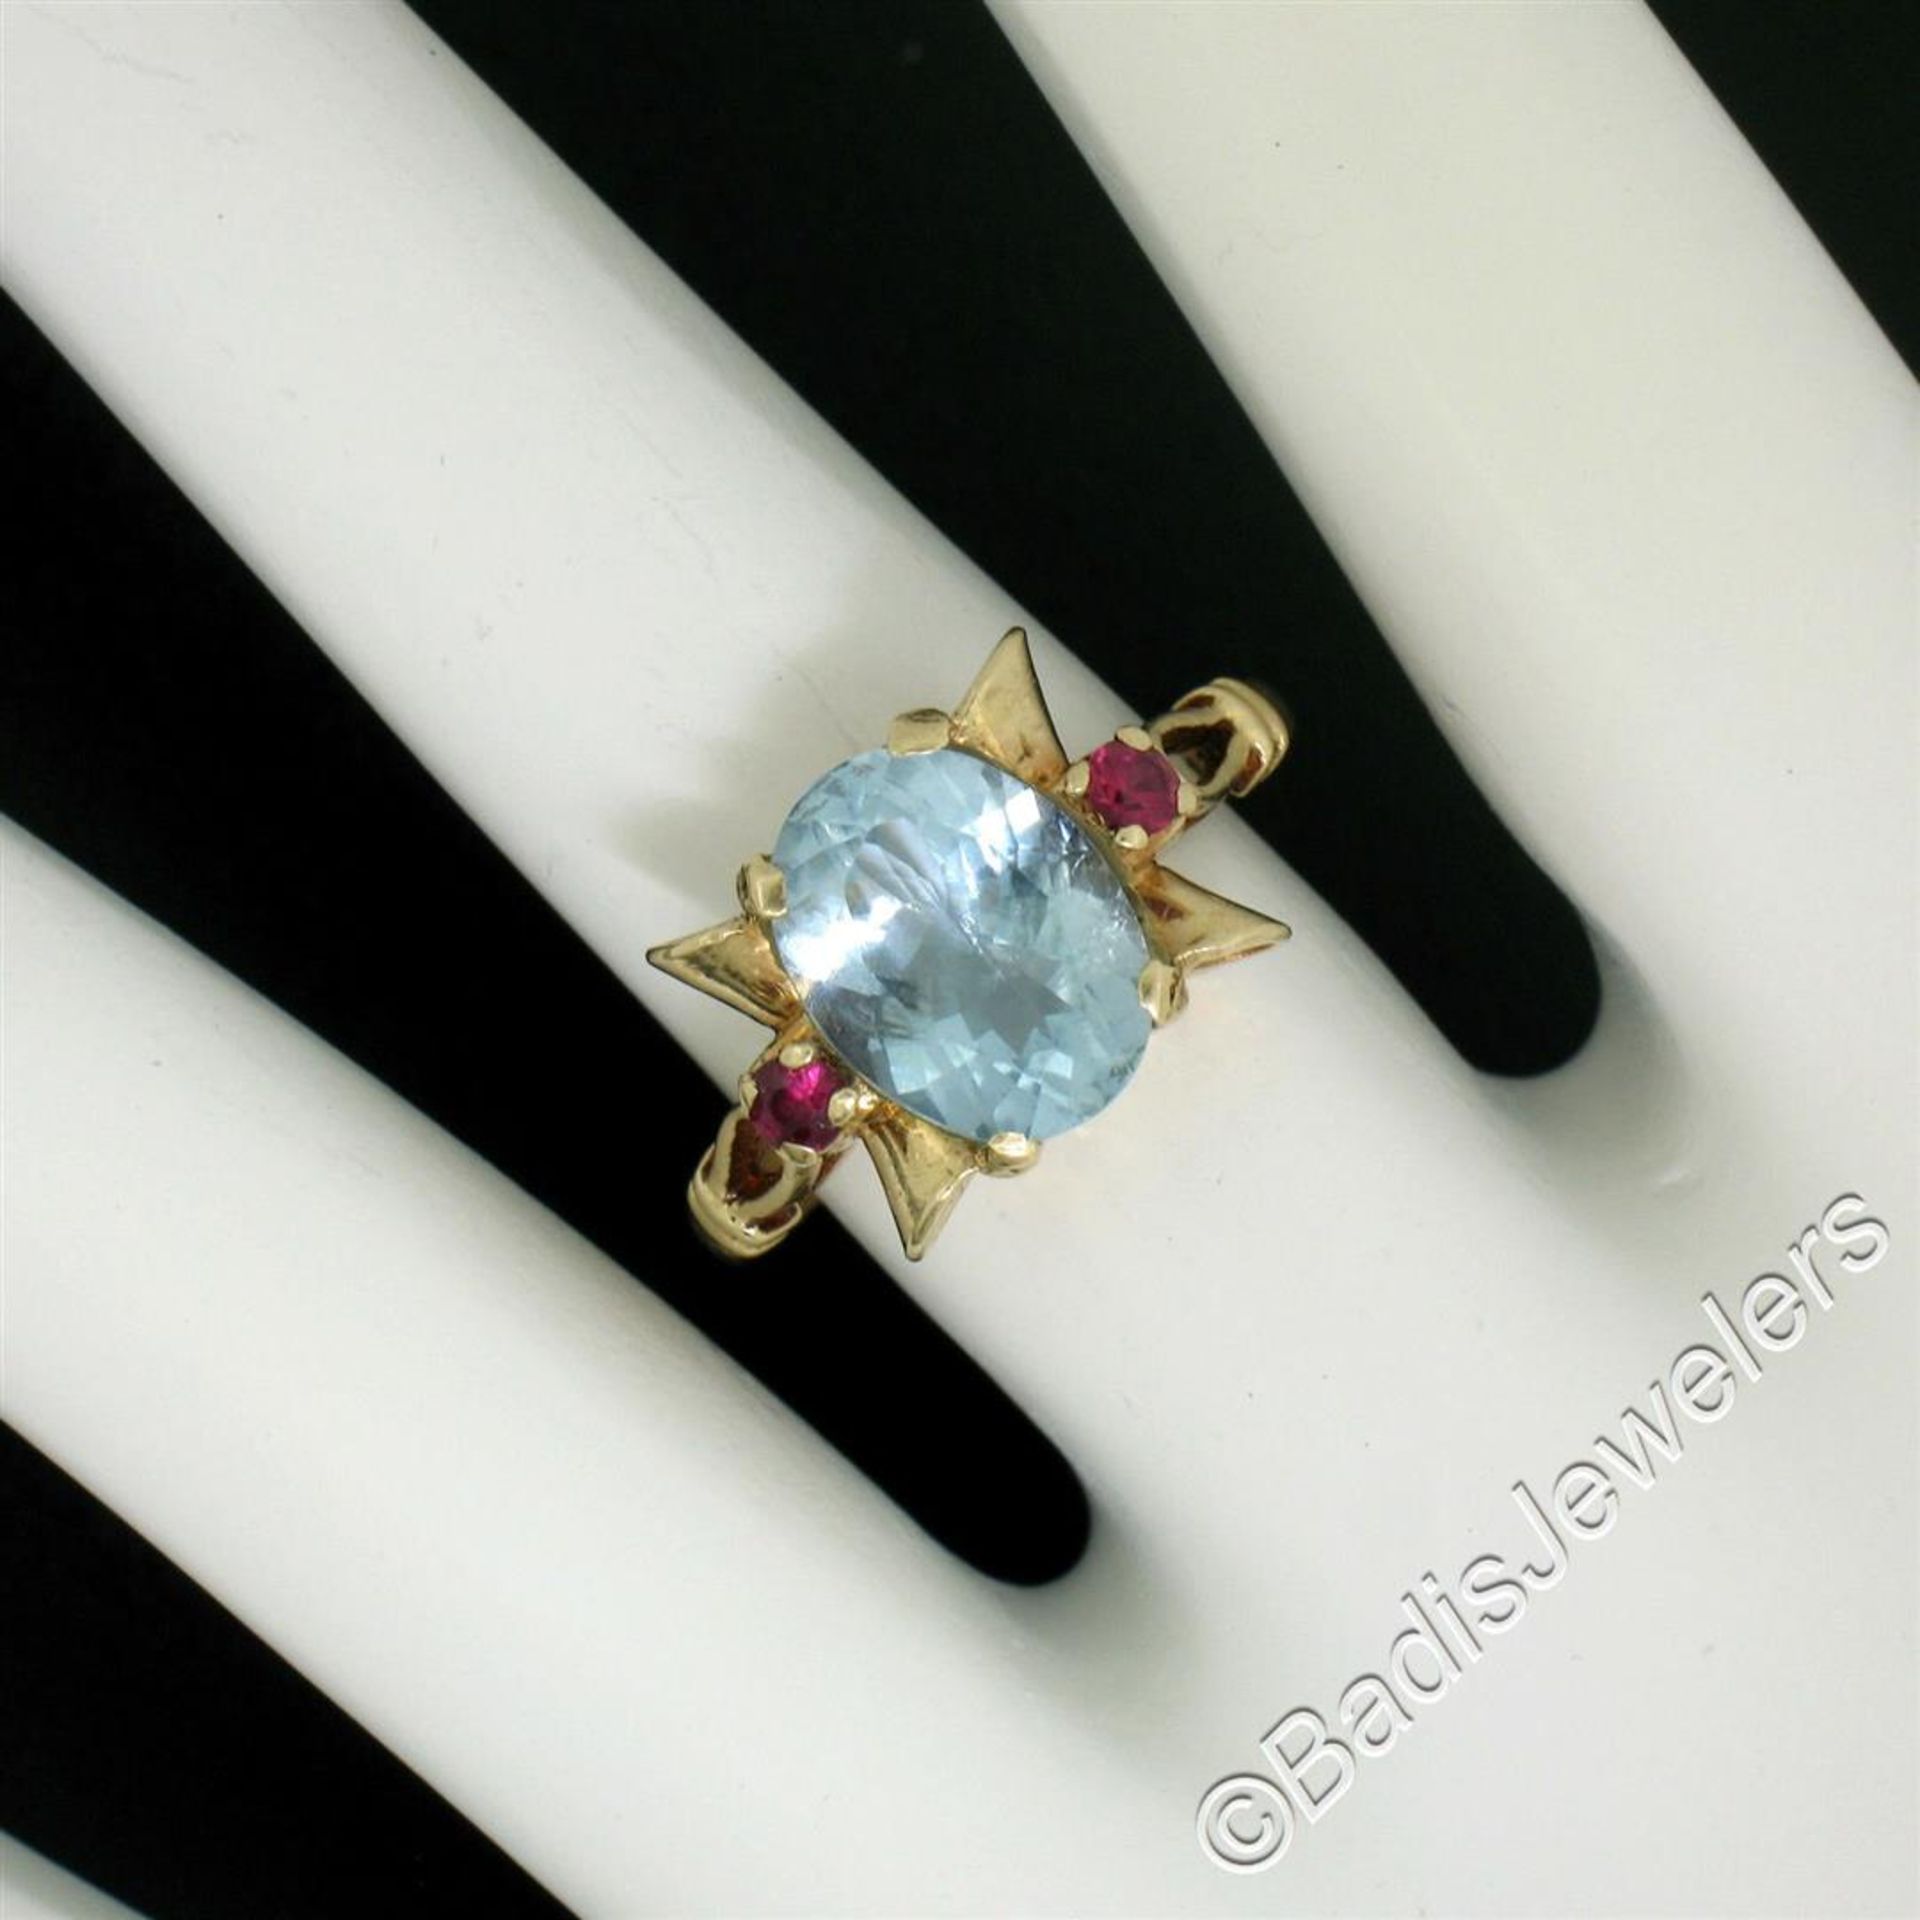 Retro 14kt Yellow Gold 2.18 ctw Aquamarine Solitaire and Synthetic Ruby Ring - Image 2 of 9